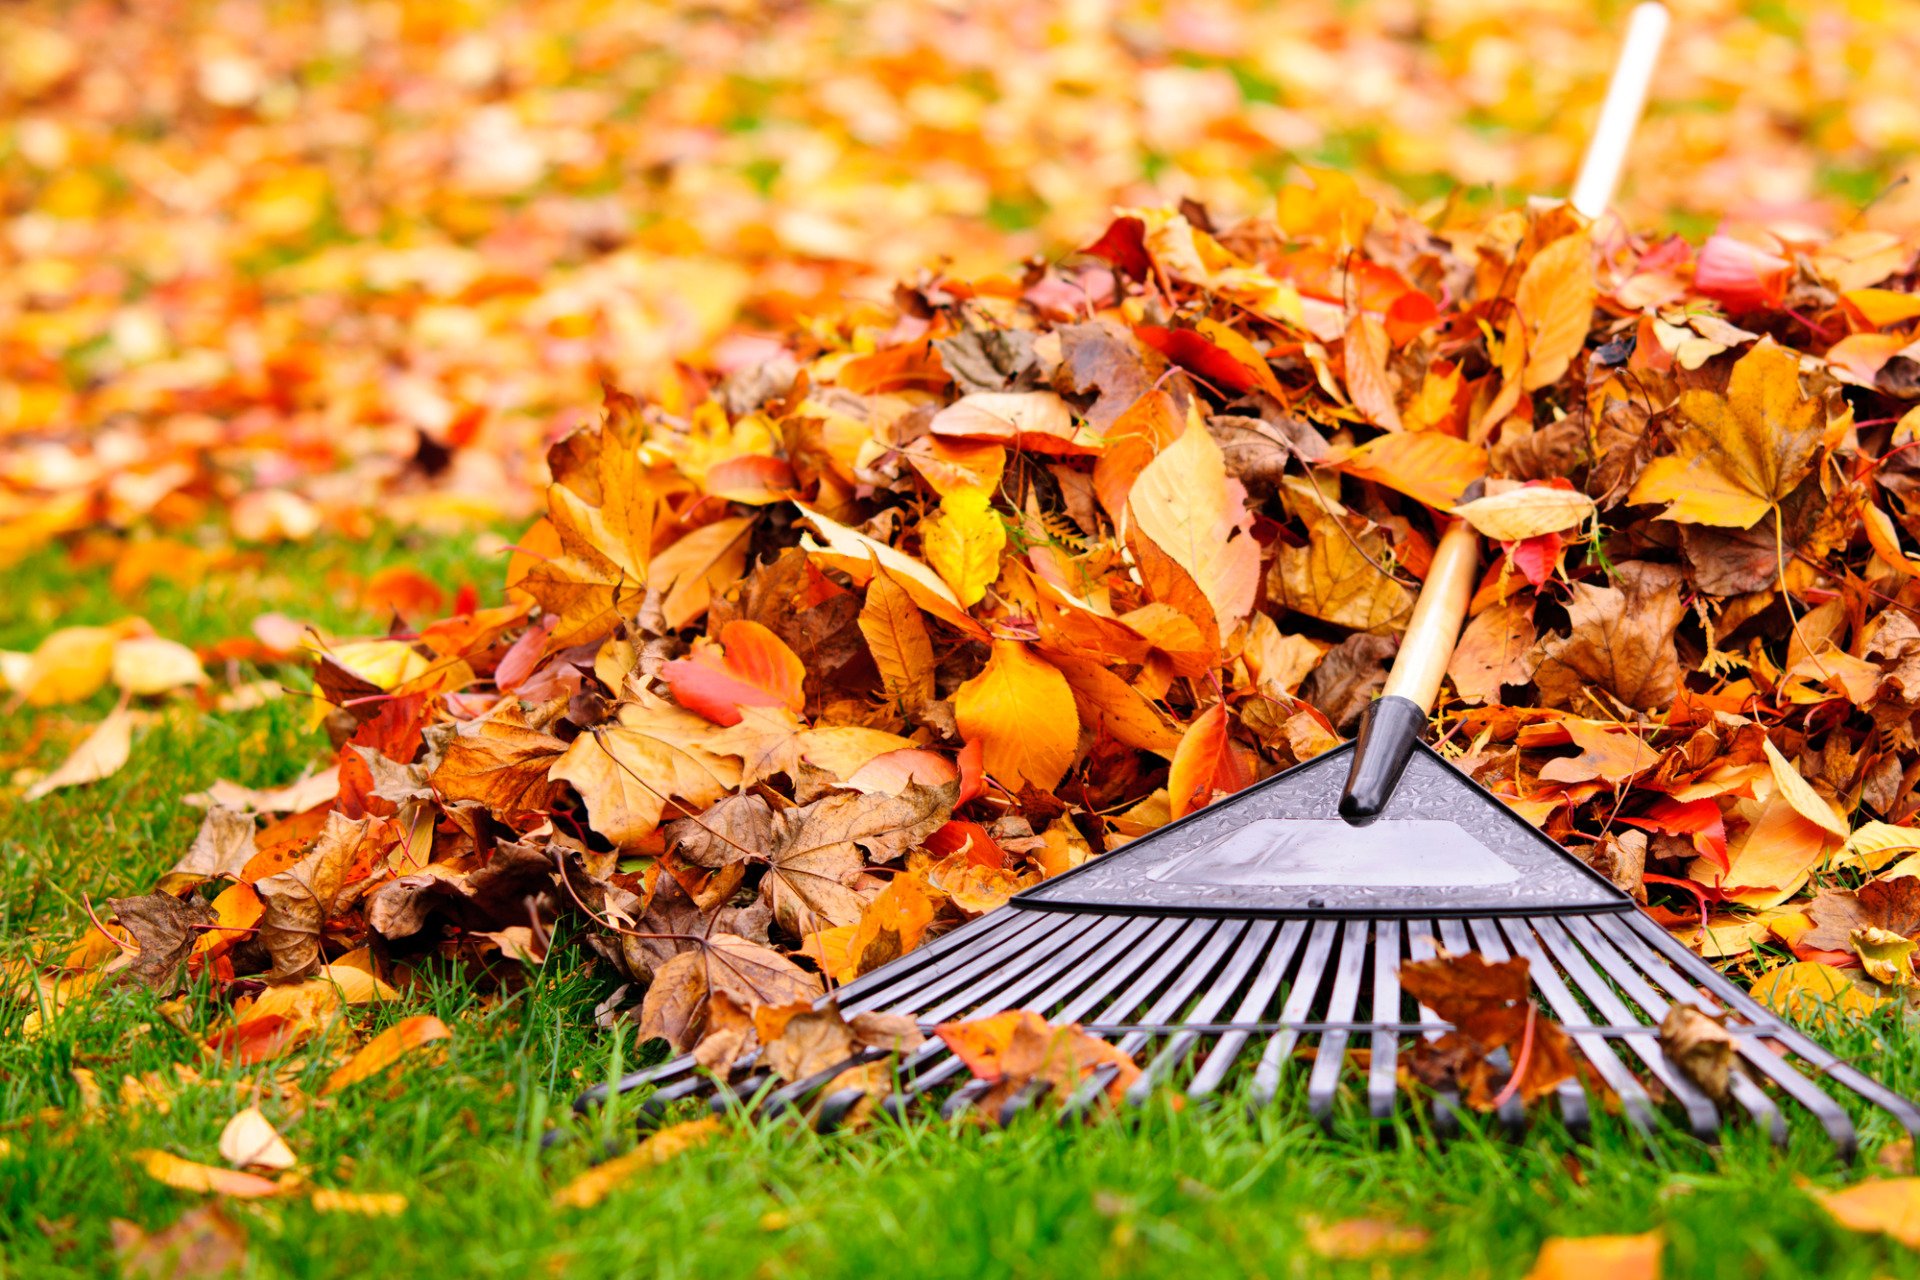 autumn lawn care by raking leaves